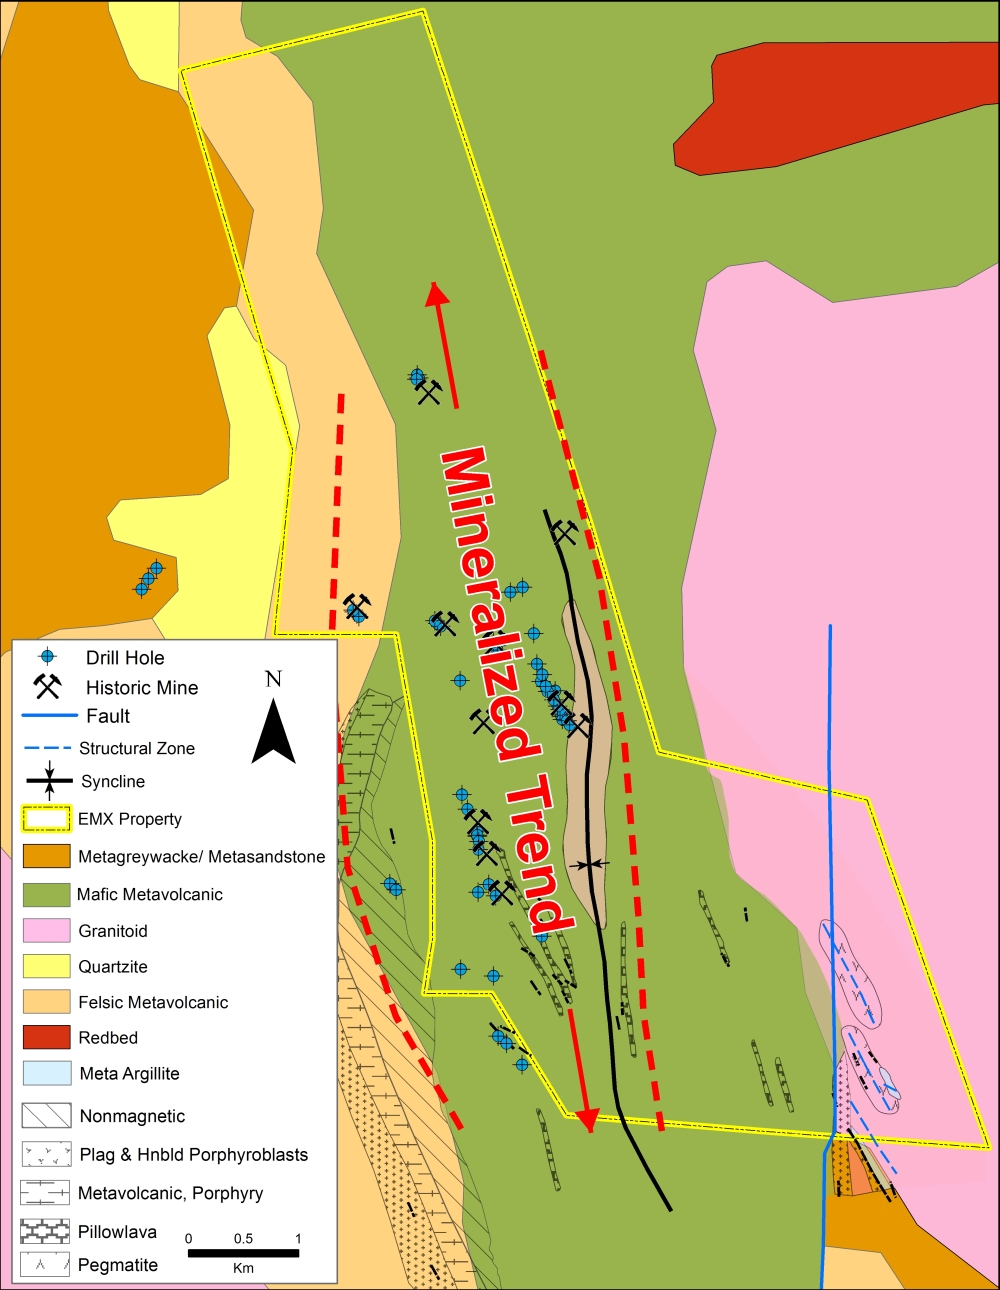 Geology of the Guldgruvan area. Mafic volcanic, diabasic intrusive, and local carbonate-hosted Cu-Ni-Co-Zn-Pb-Ag-Au mineralization as veins and replacements as well as local massive sulfide horizons